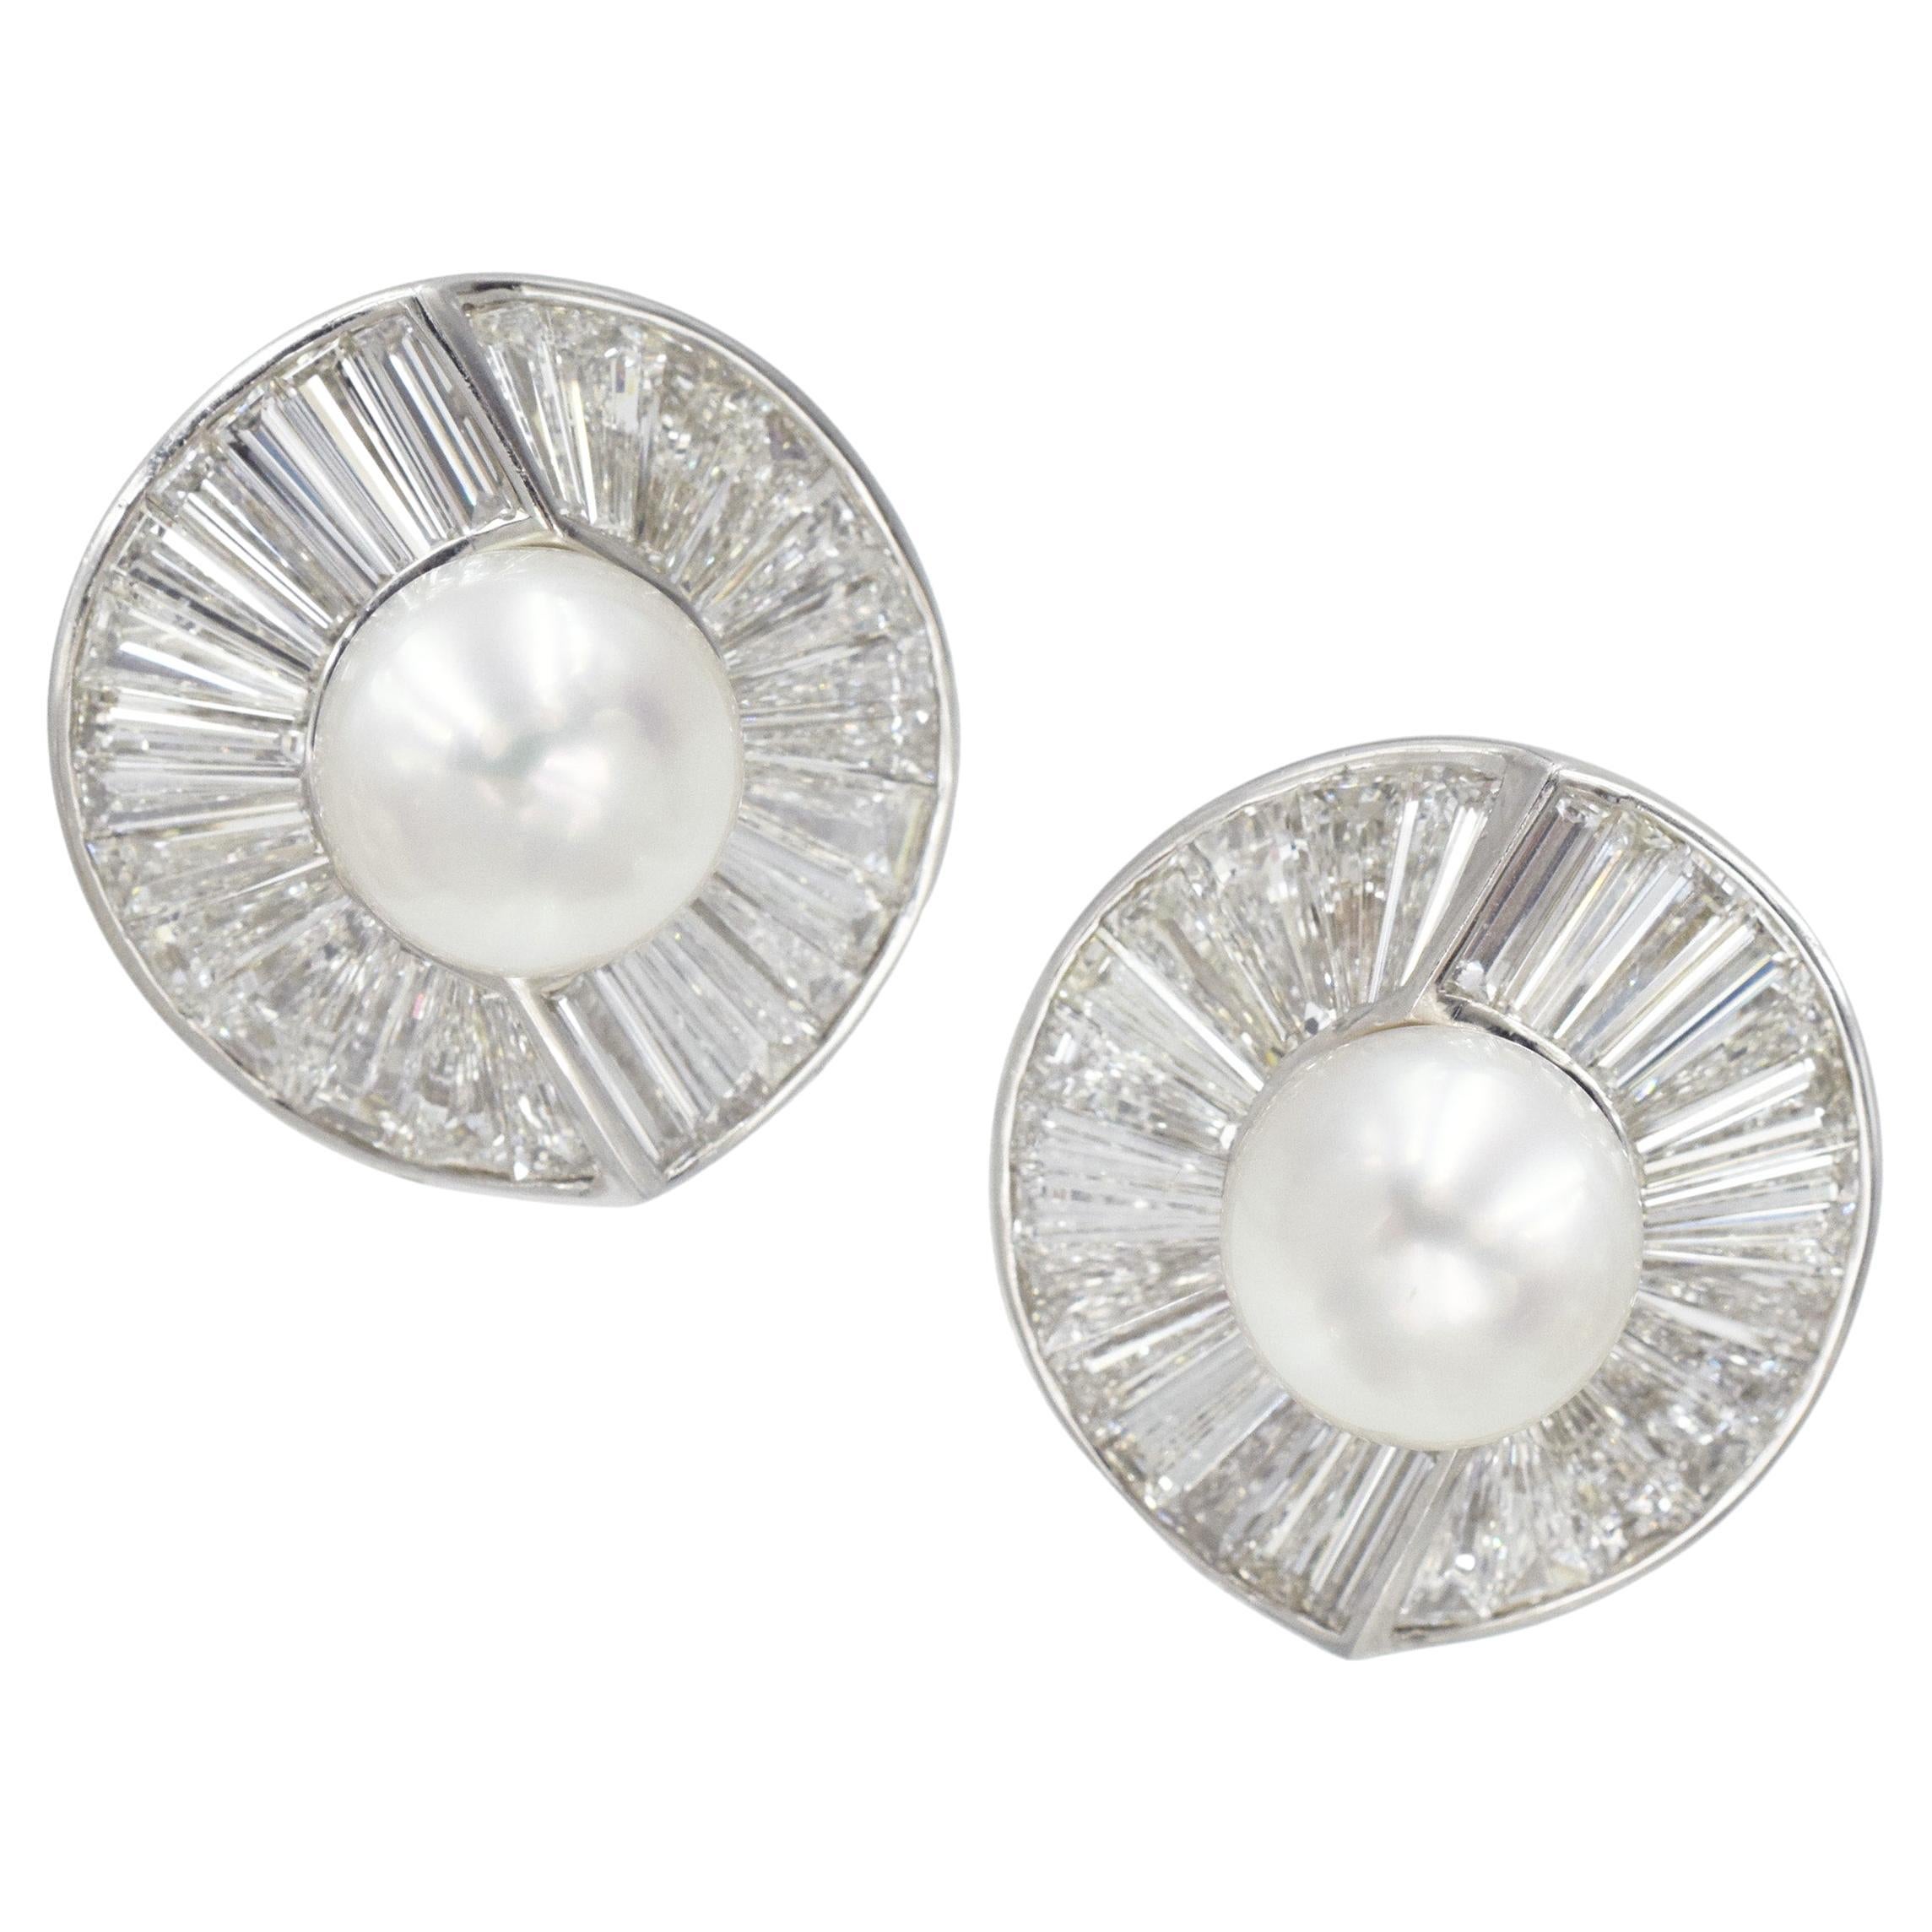 Vintage Harry Winston Pearl and Diamond Clip-On Earrings In Platinum. Circa 1960's. The earrings feature circular design, set in the center with total of two 12mm white cultured pearls. Surrounded by 56 tapered baguettes
with total weight of